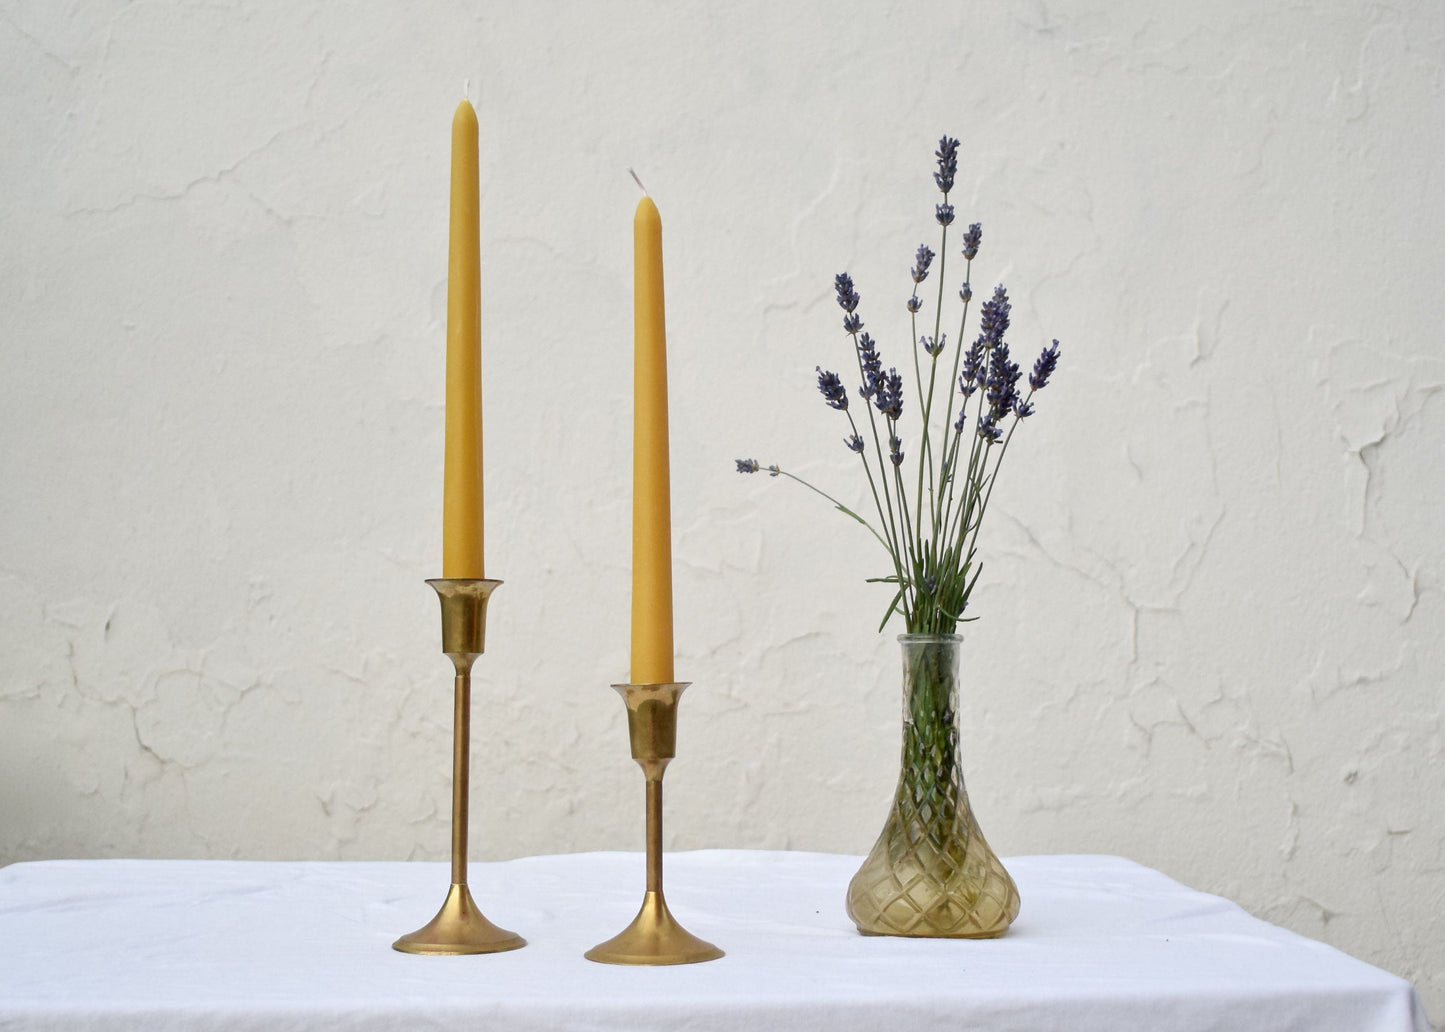 10" Tall Beeswax Taper Candles, 100% Pure Handfiltered Beeswax, Candles Pair of 2 // Tapers, Tapered Candles, Beeswax Candles